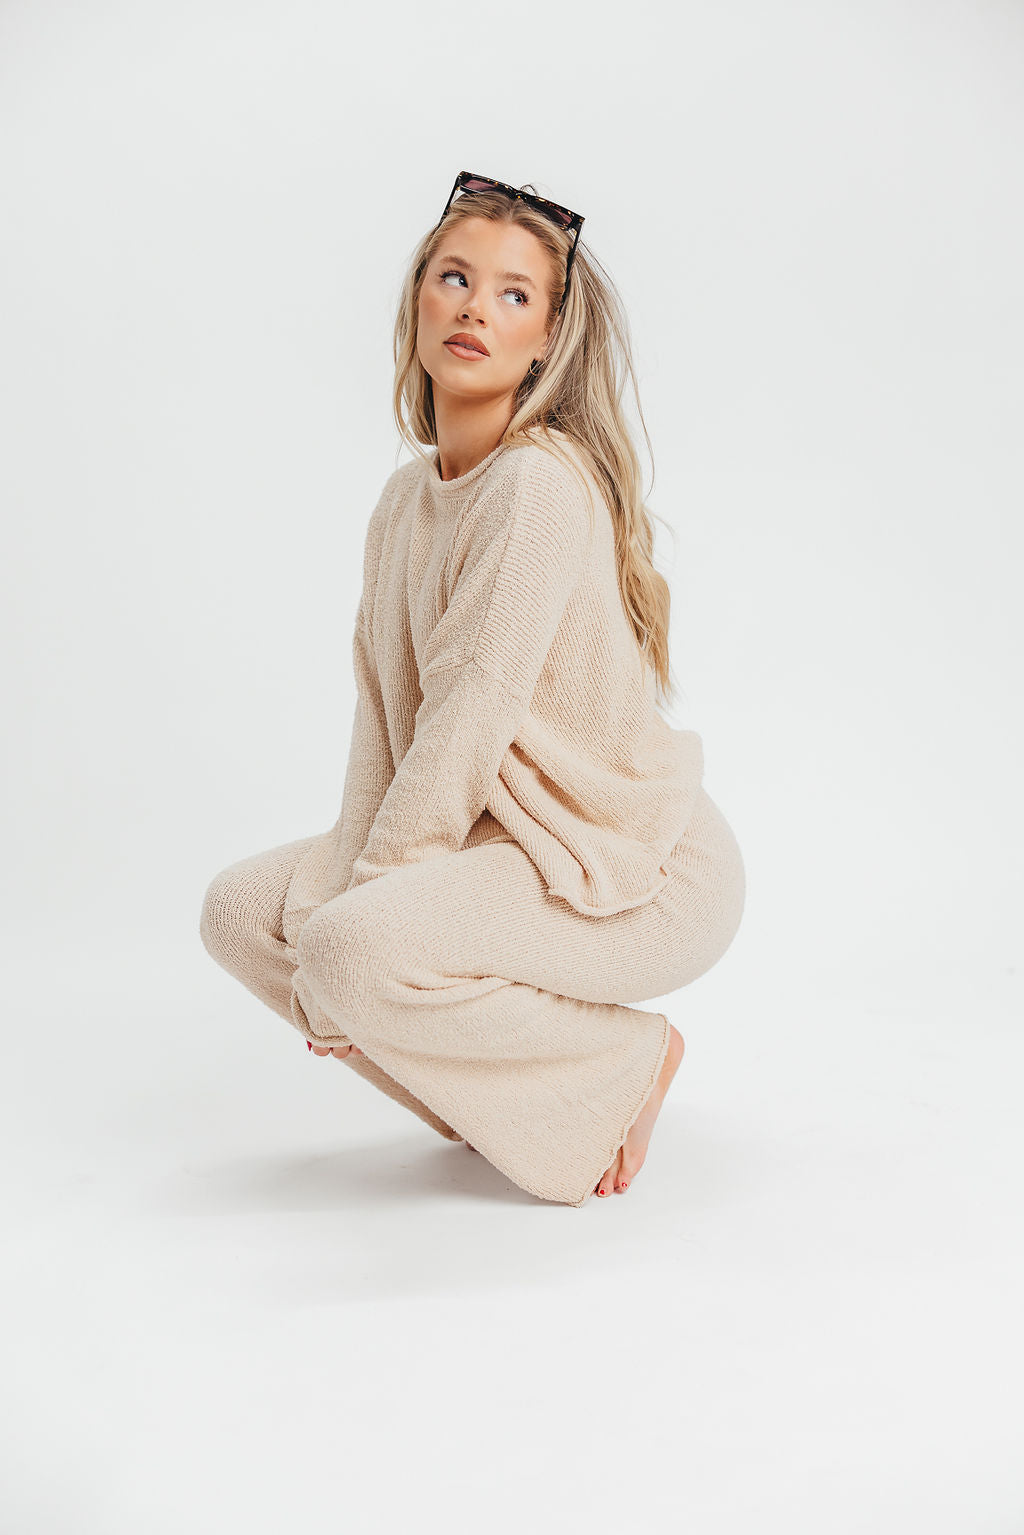 Lainey Asymmetric Sweater and Pant Set in Cream